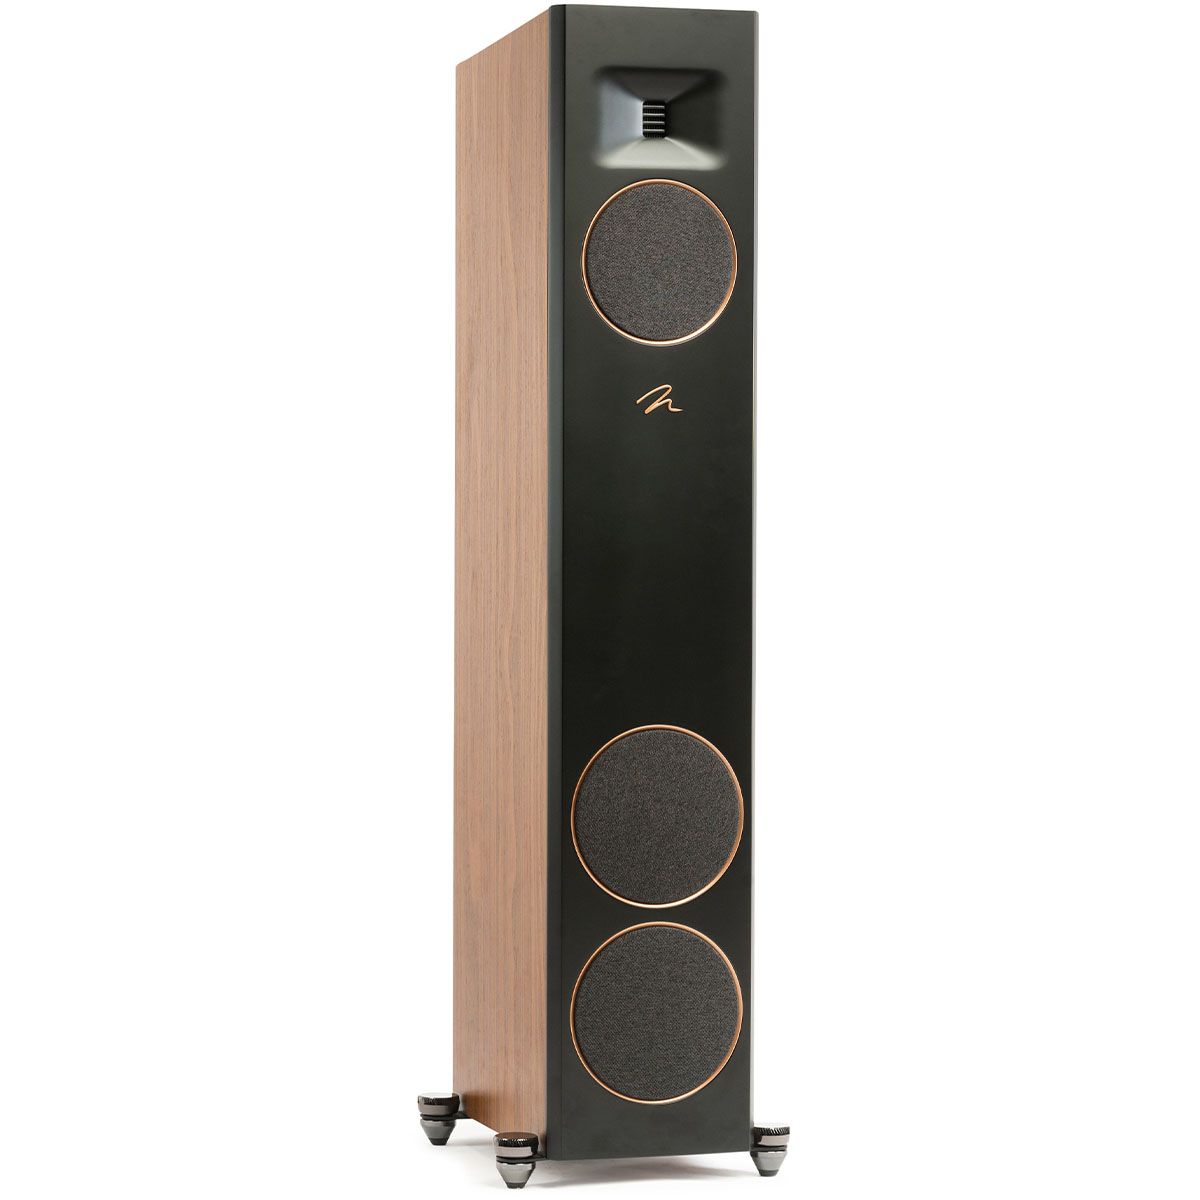 MartinLogan Motion XT F20 Floorstanding Speaker in walnut, angled view with grilles on white background